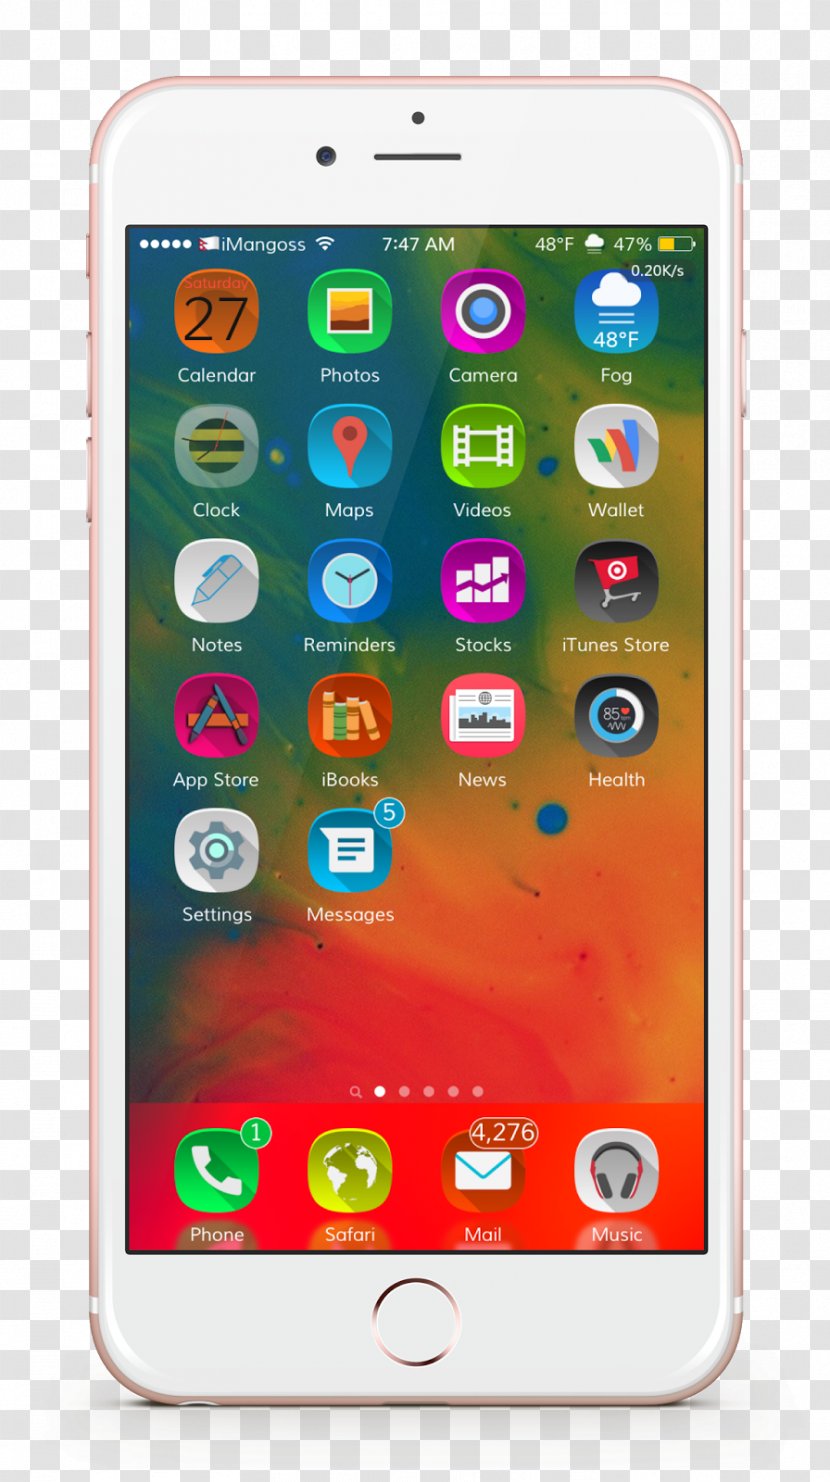 Feature Phone Smartphone IPhone X IOS 10 - Technology Transparent PNG